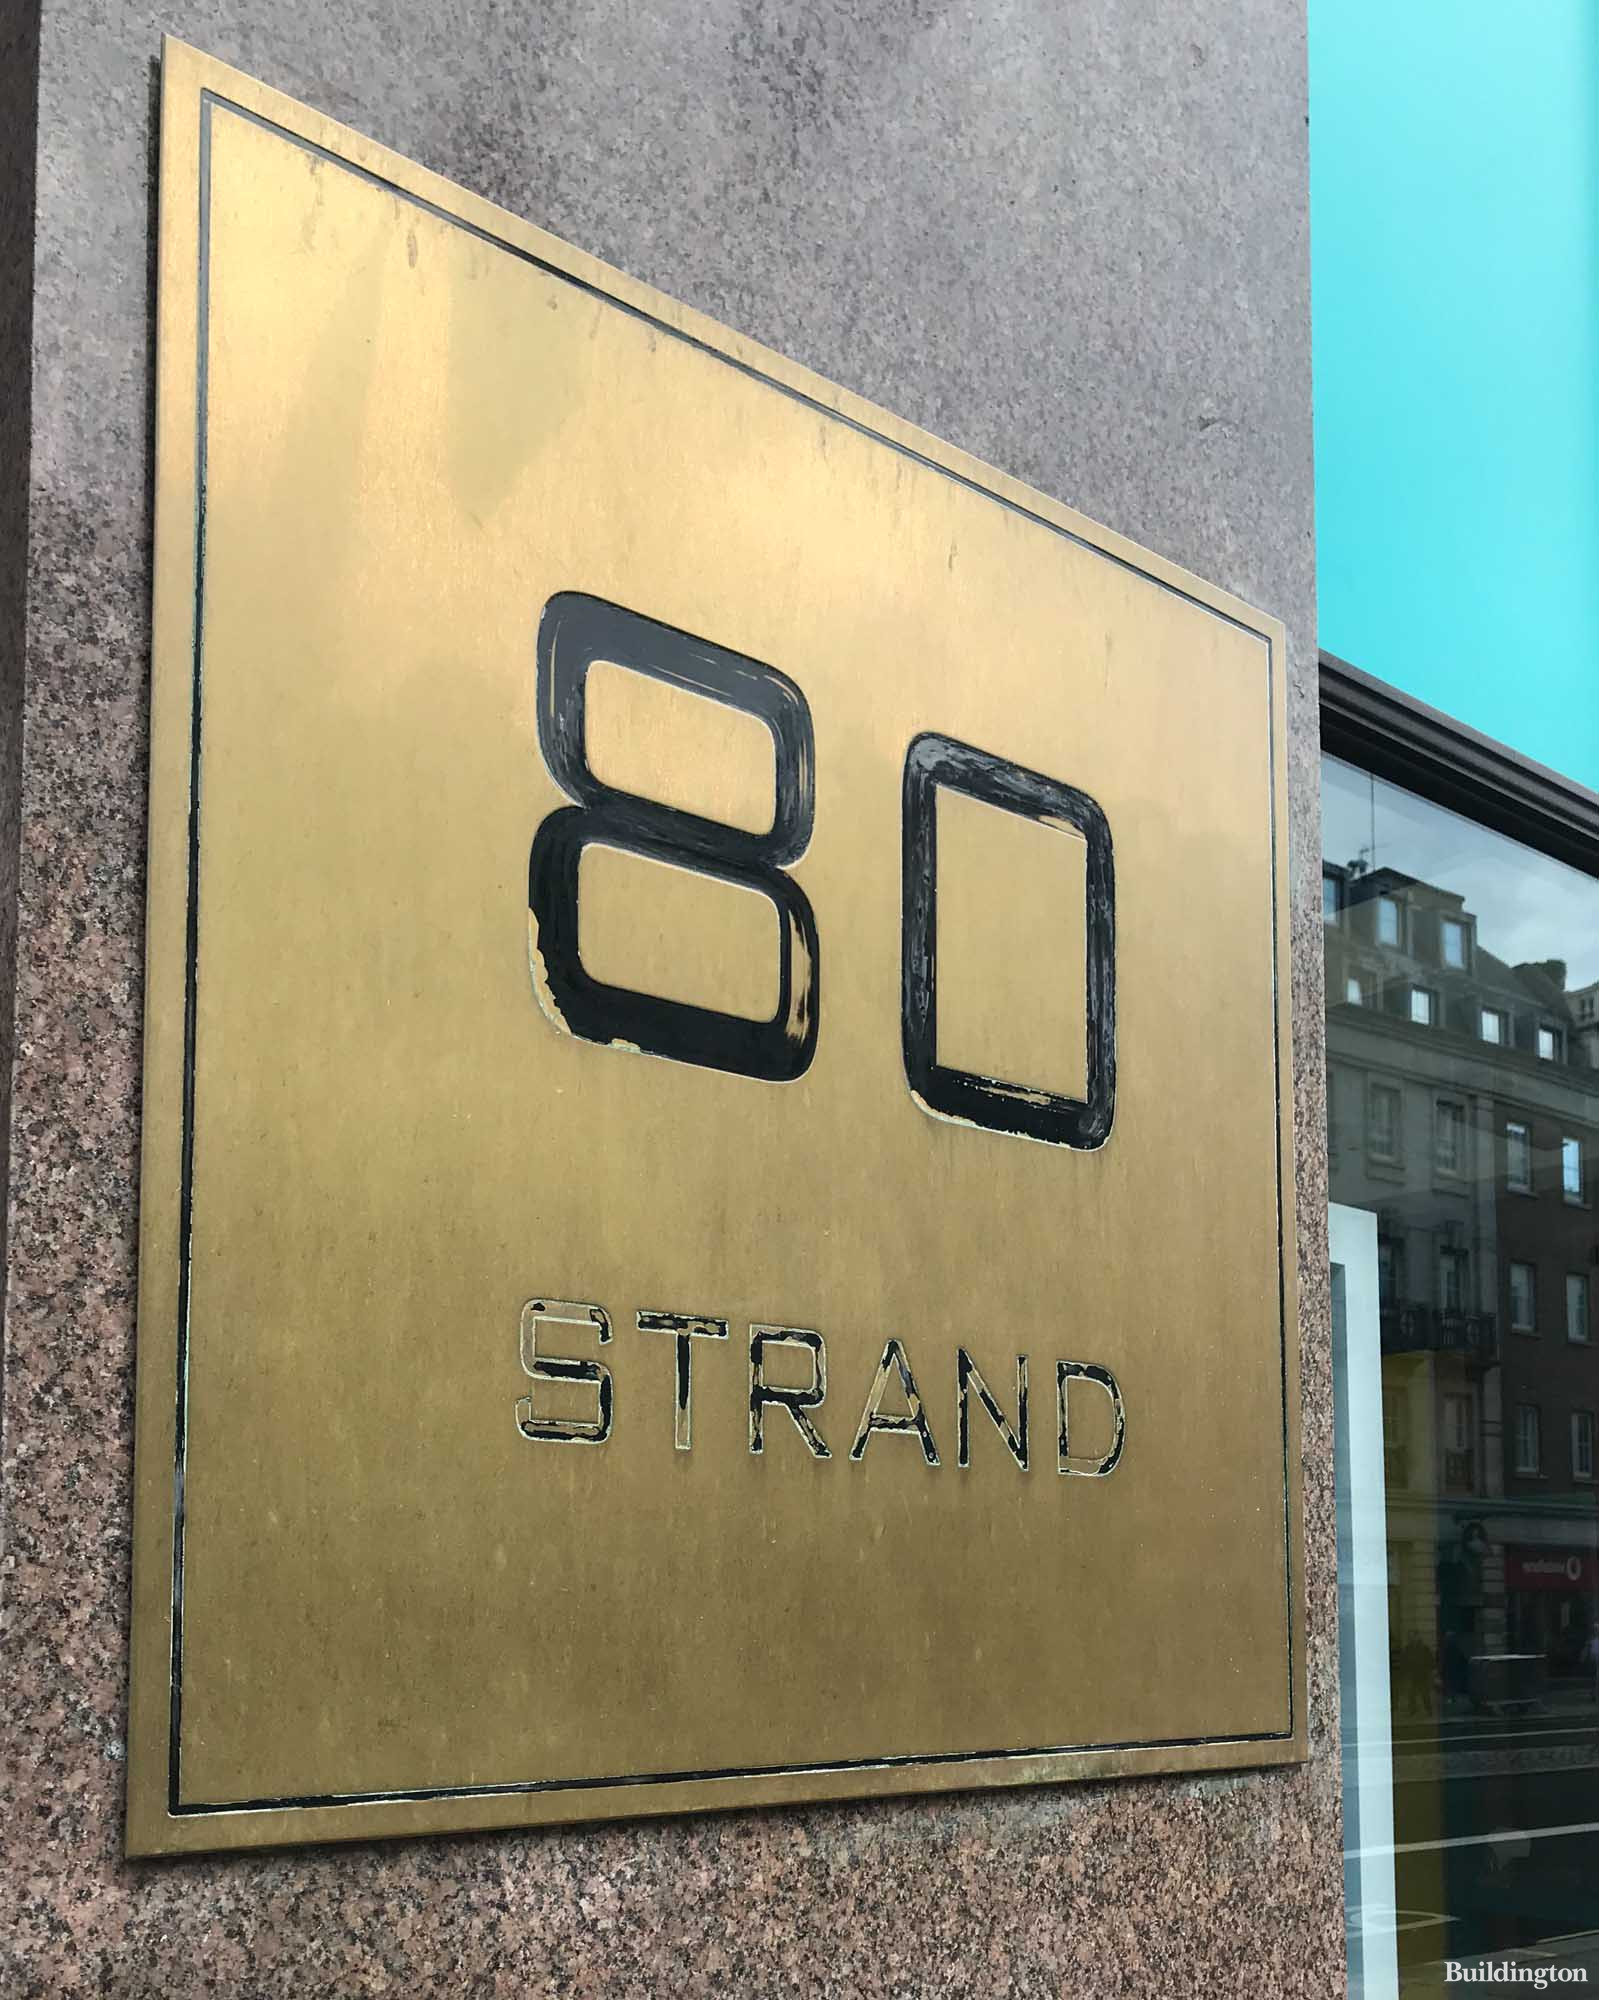 Eighty Strand building signage on Strand, London WC2.